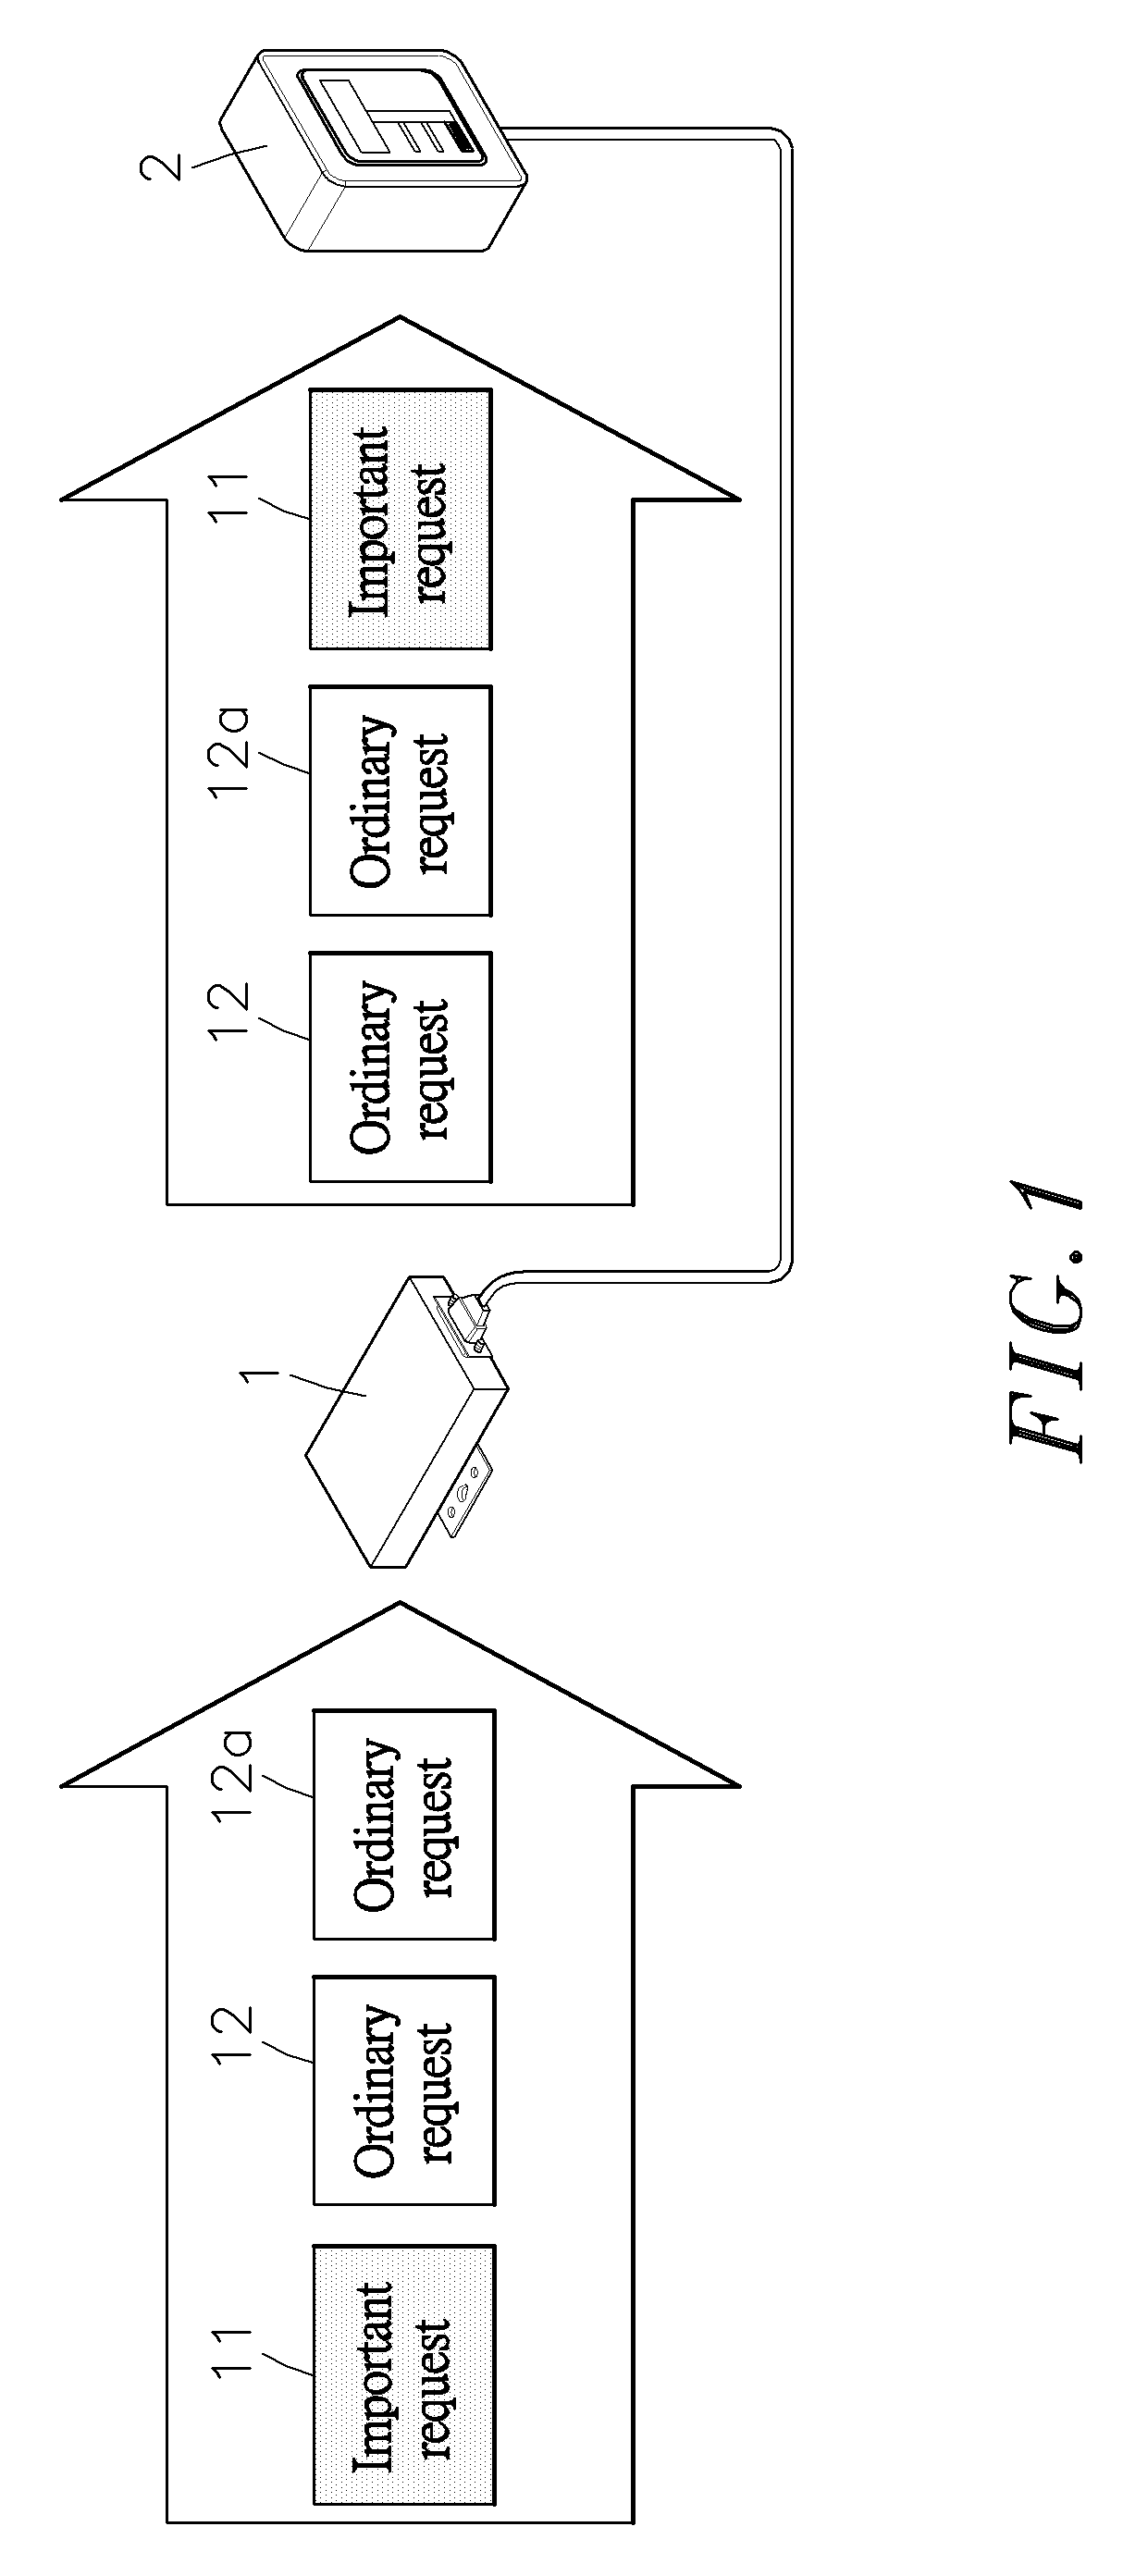 Method of determining request transmission priority subject to request source and transmitting request subject to such request transmission priority in application of fieldbus communication framework